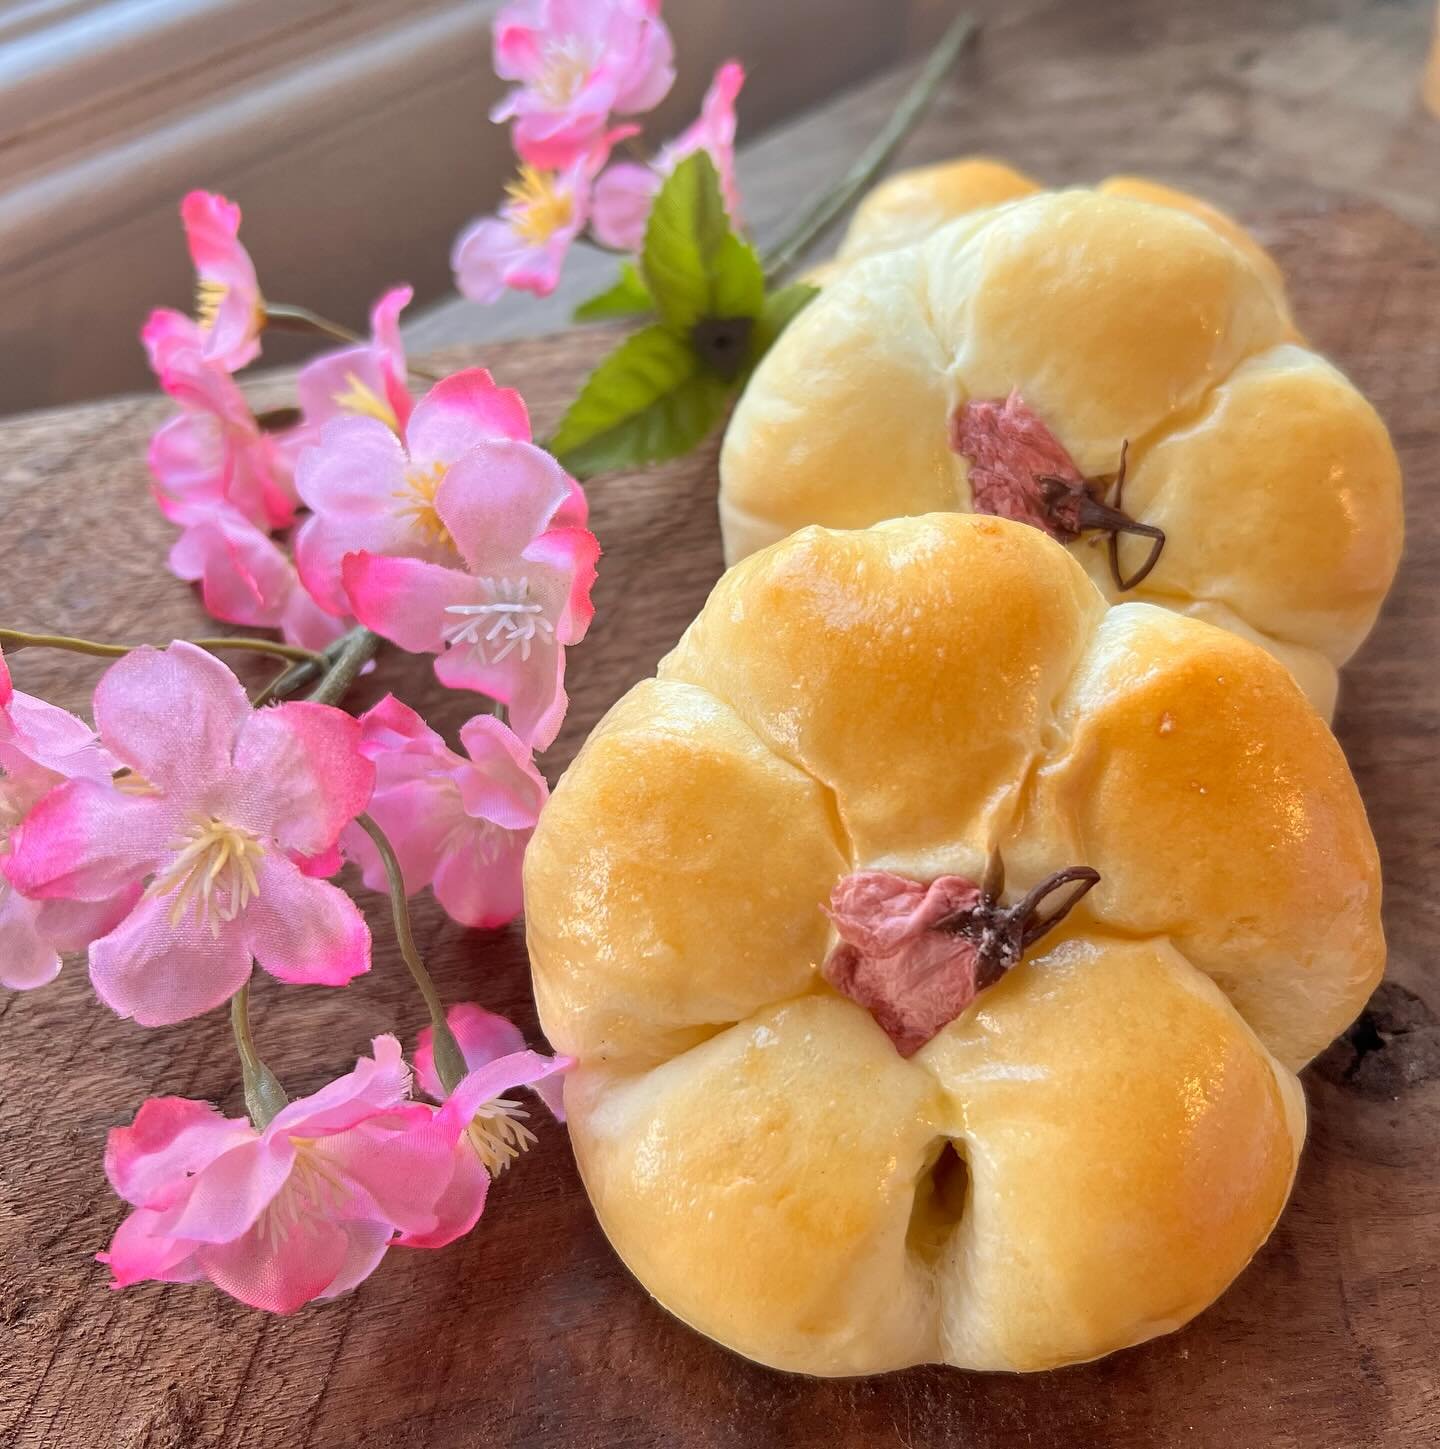 Mother&rsquo;s Day Special!

Ruby chocolate &amp; vanilla bean custard rolled into a soft sweet bun, topped with real Sakura flower! Our version of flowers and chocolate for all the mother figures out there. 🌸🍫💎

**Available 5/11-5/12 at our Anahe